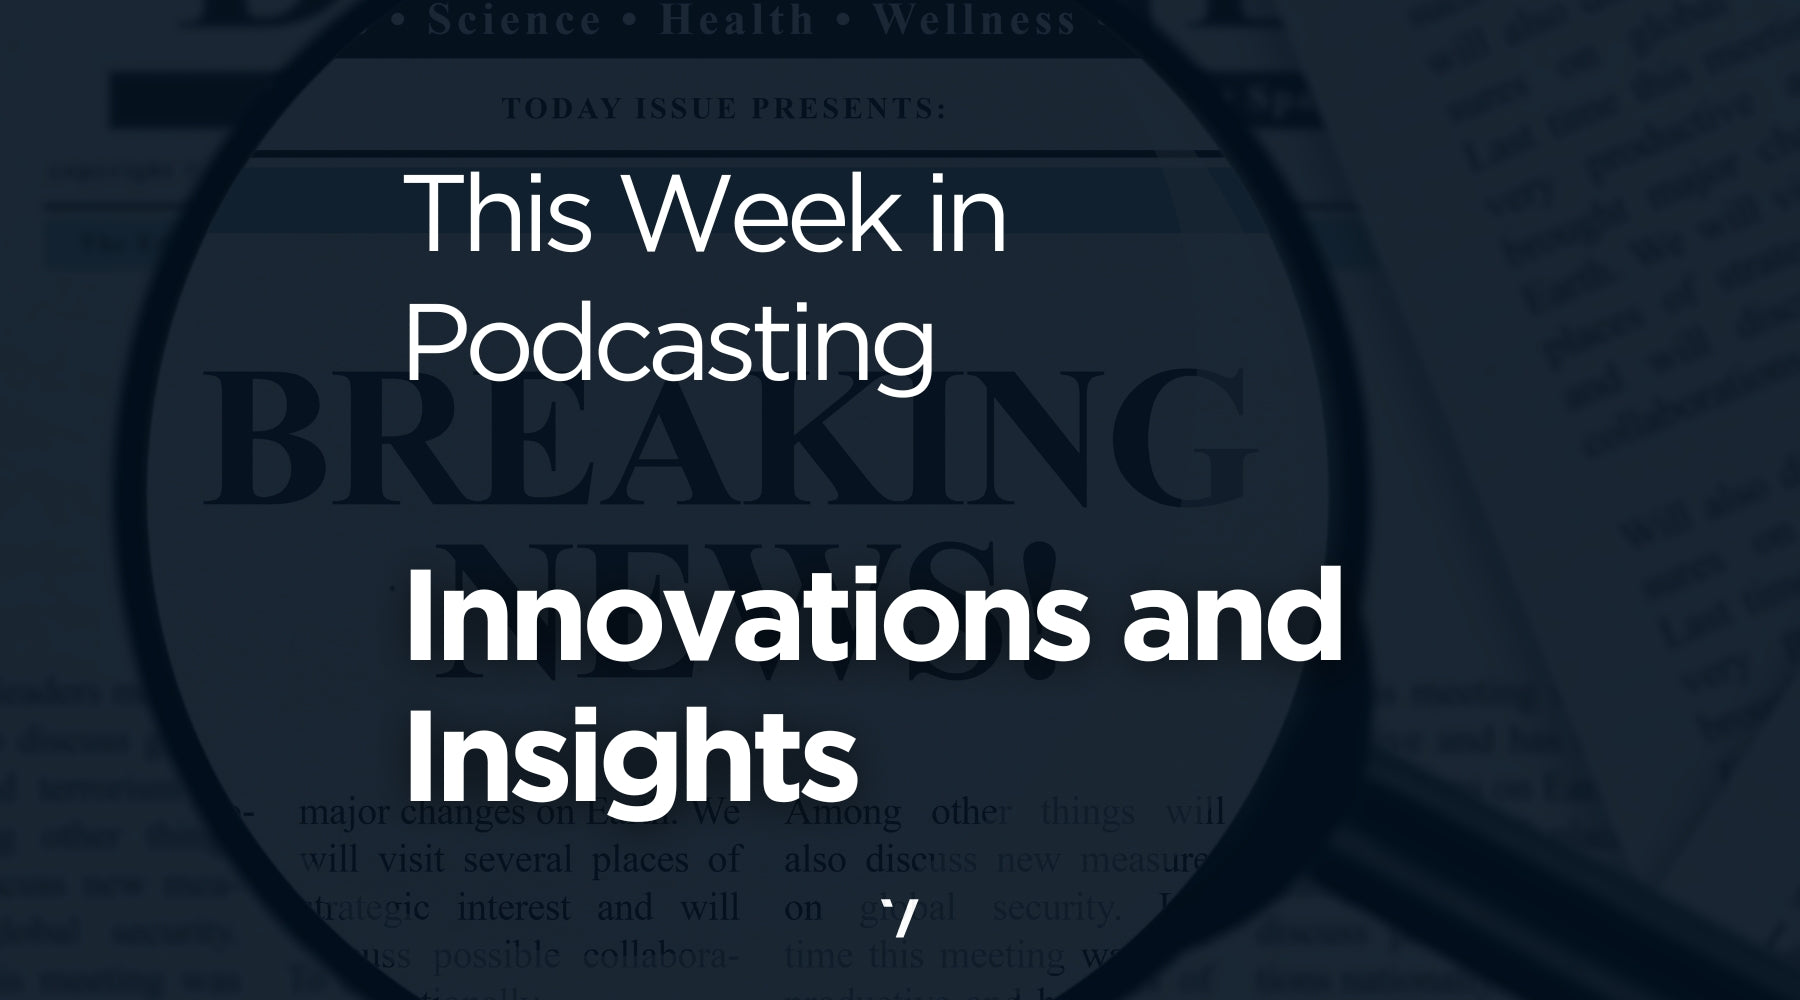 This Week in Podcasting: Innovations and Insights